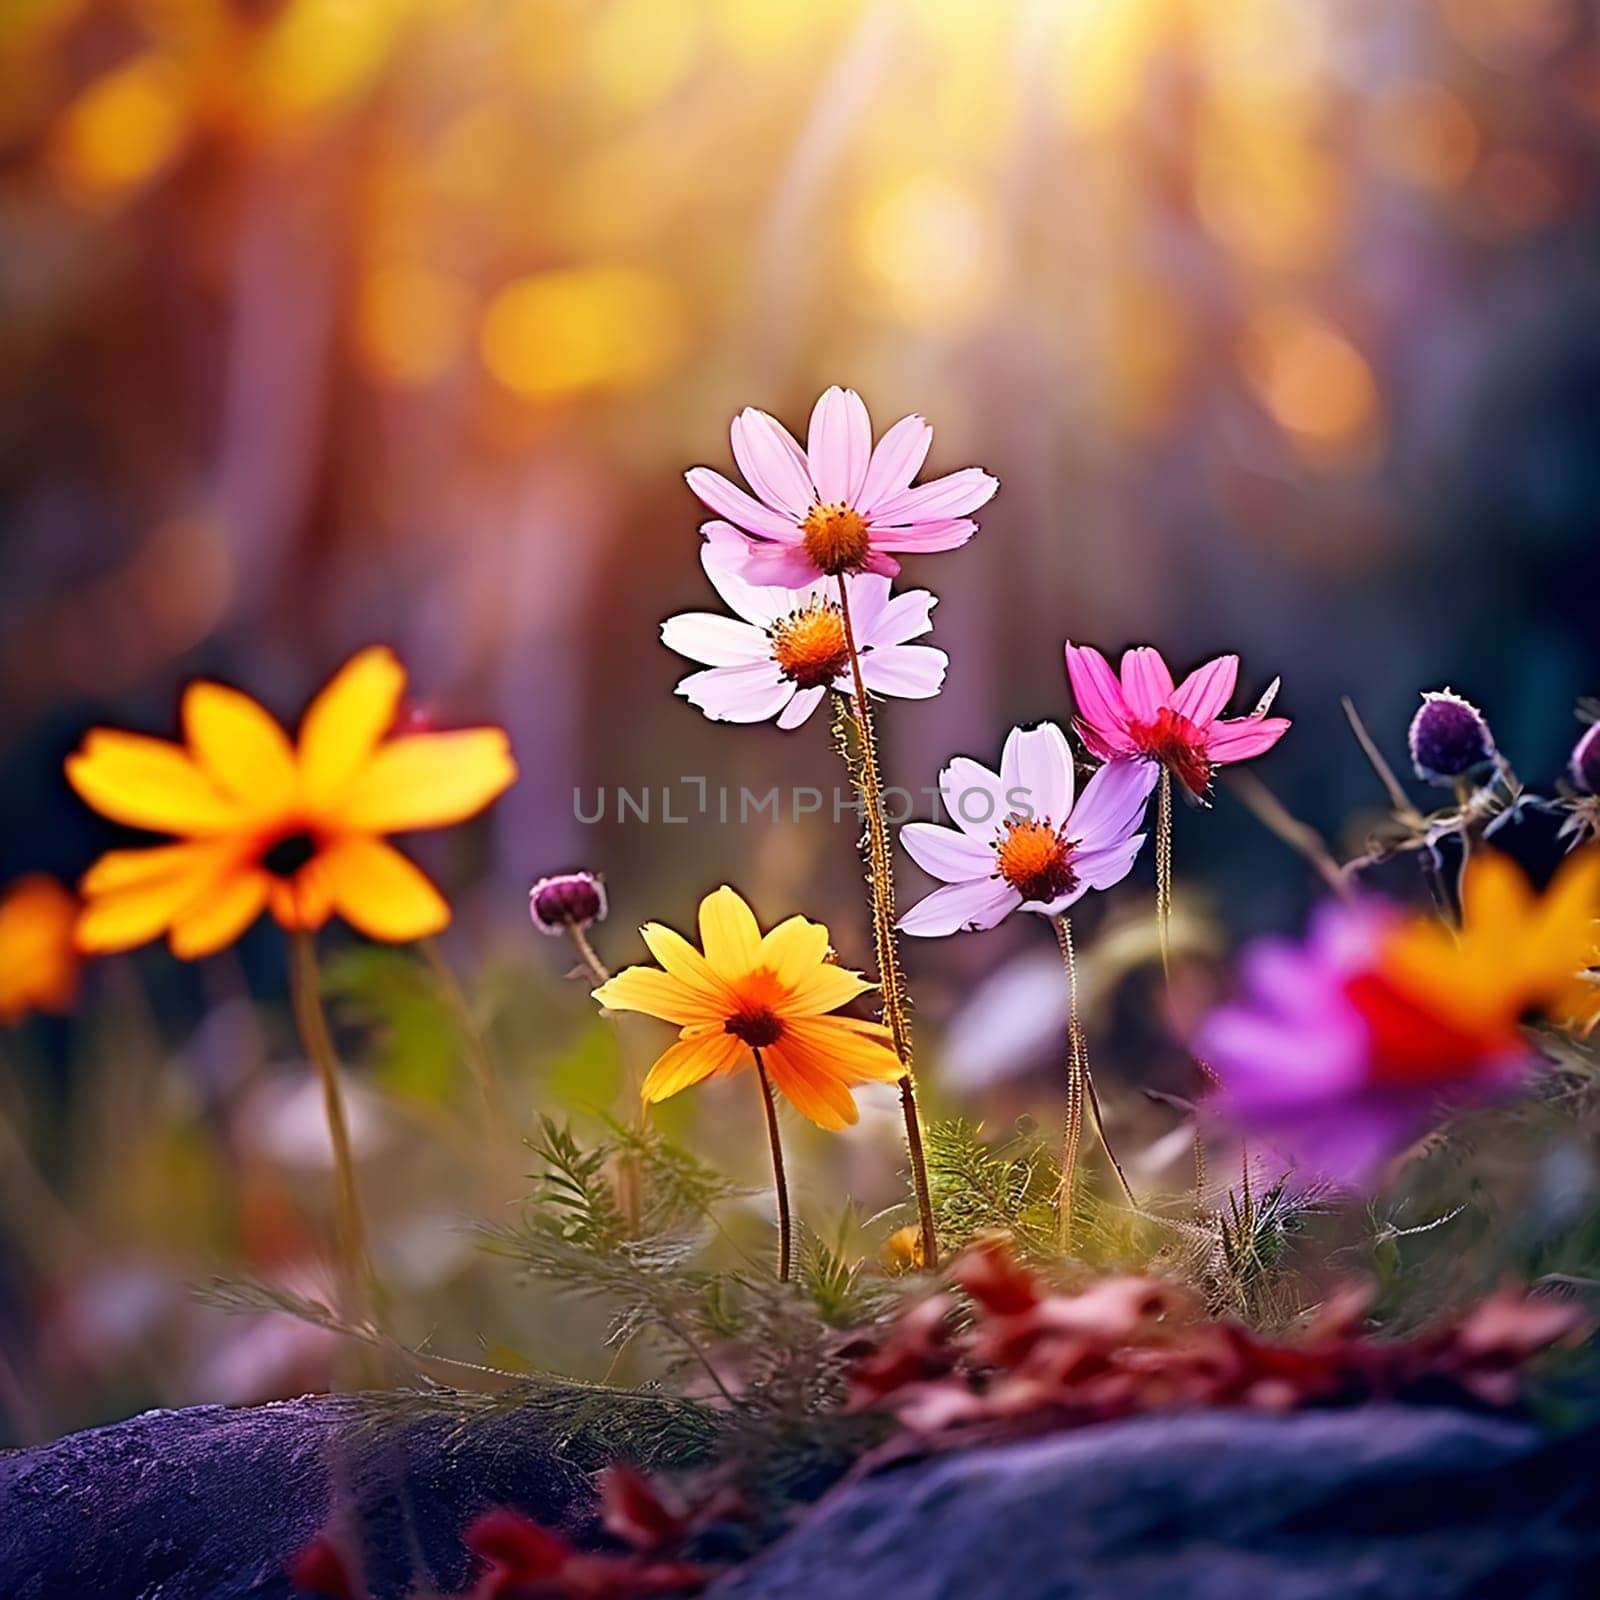 Seasonal Beauty: Wild Flowers Blooming on Summer or Autumn Nature Background, Website Banner by Petrichor